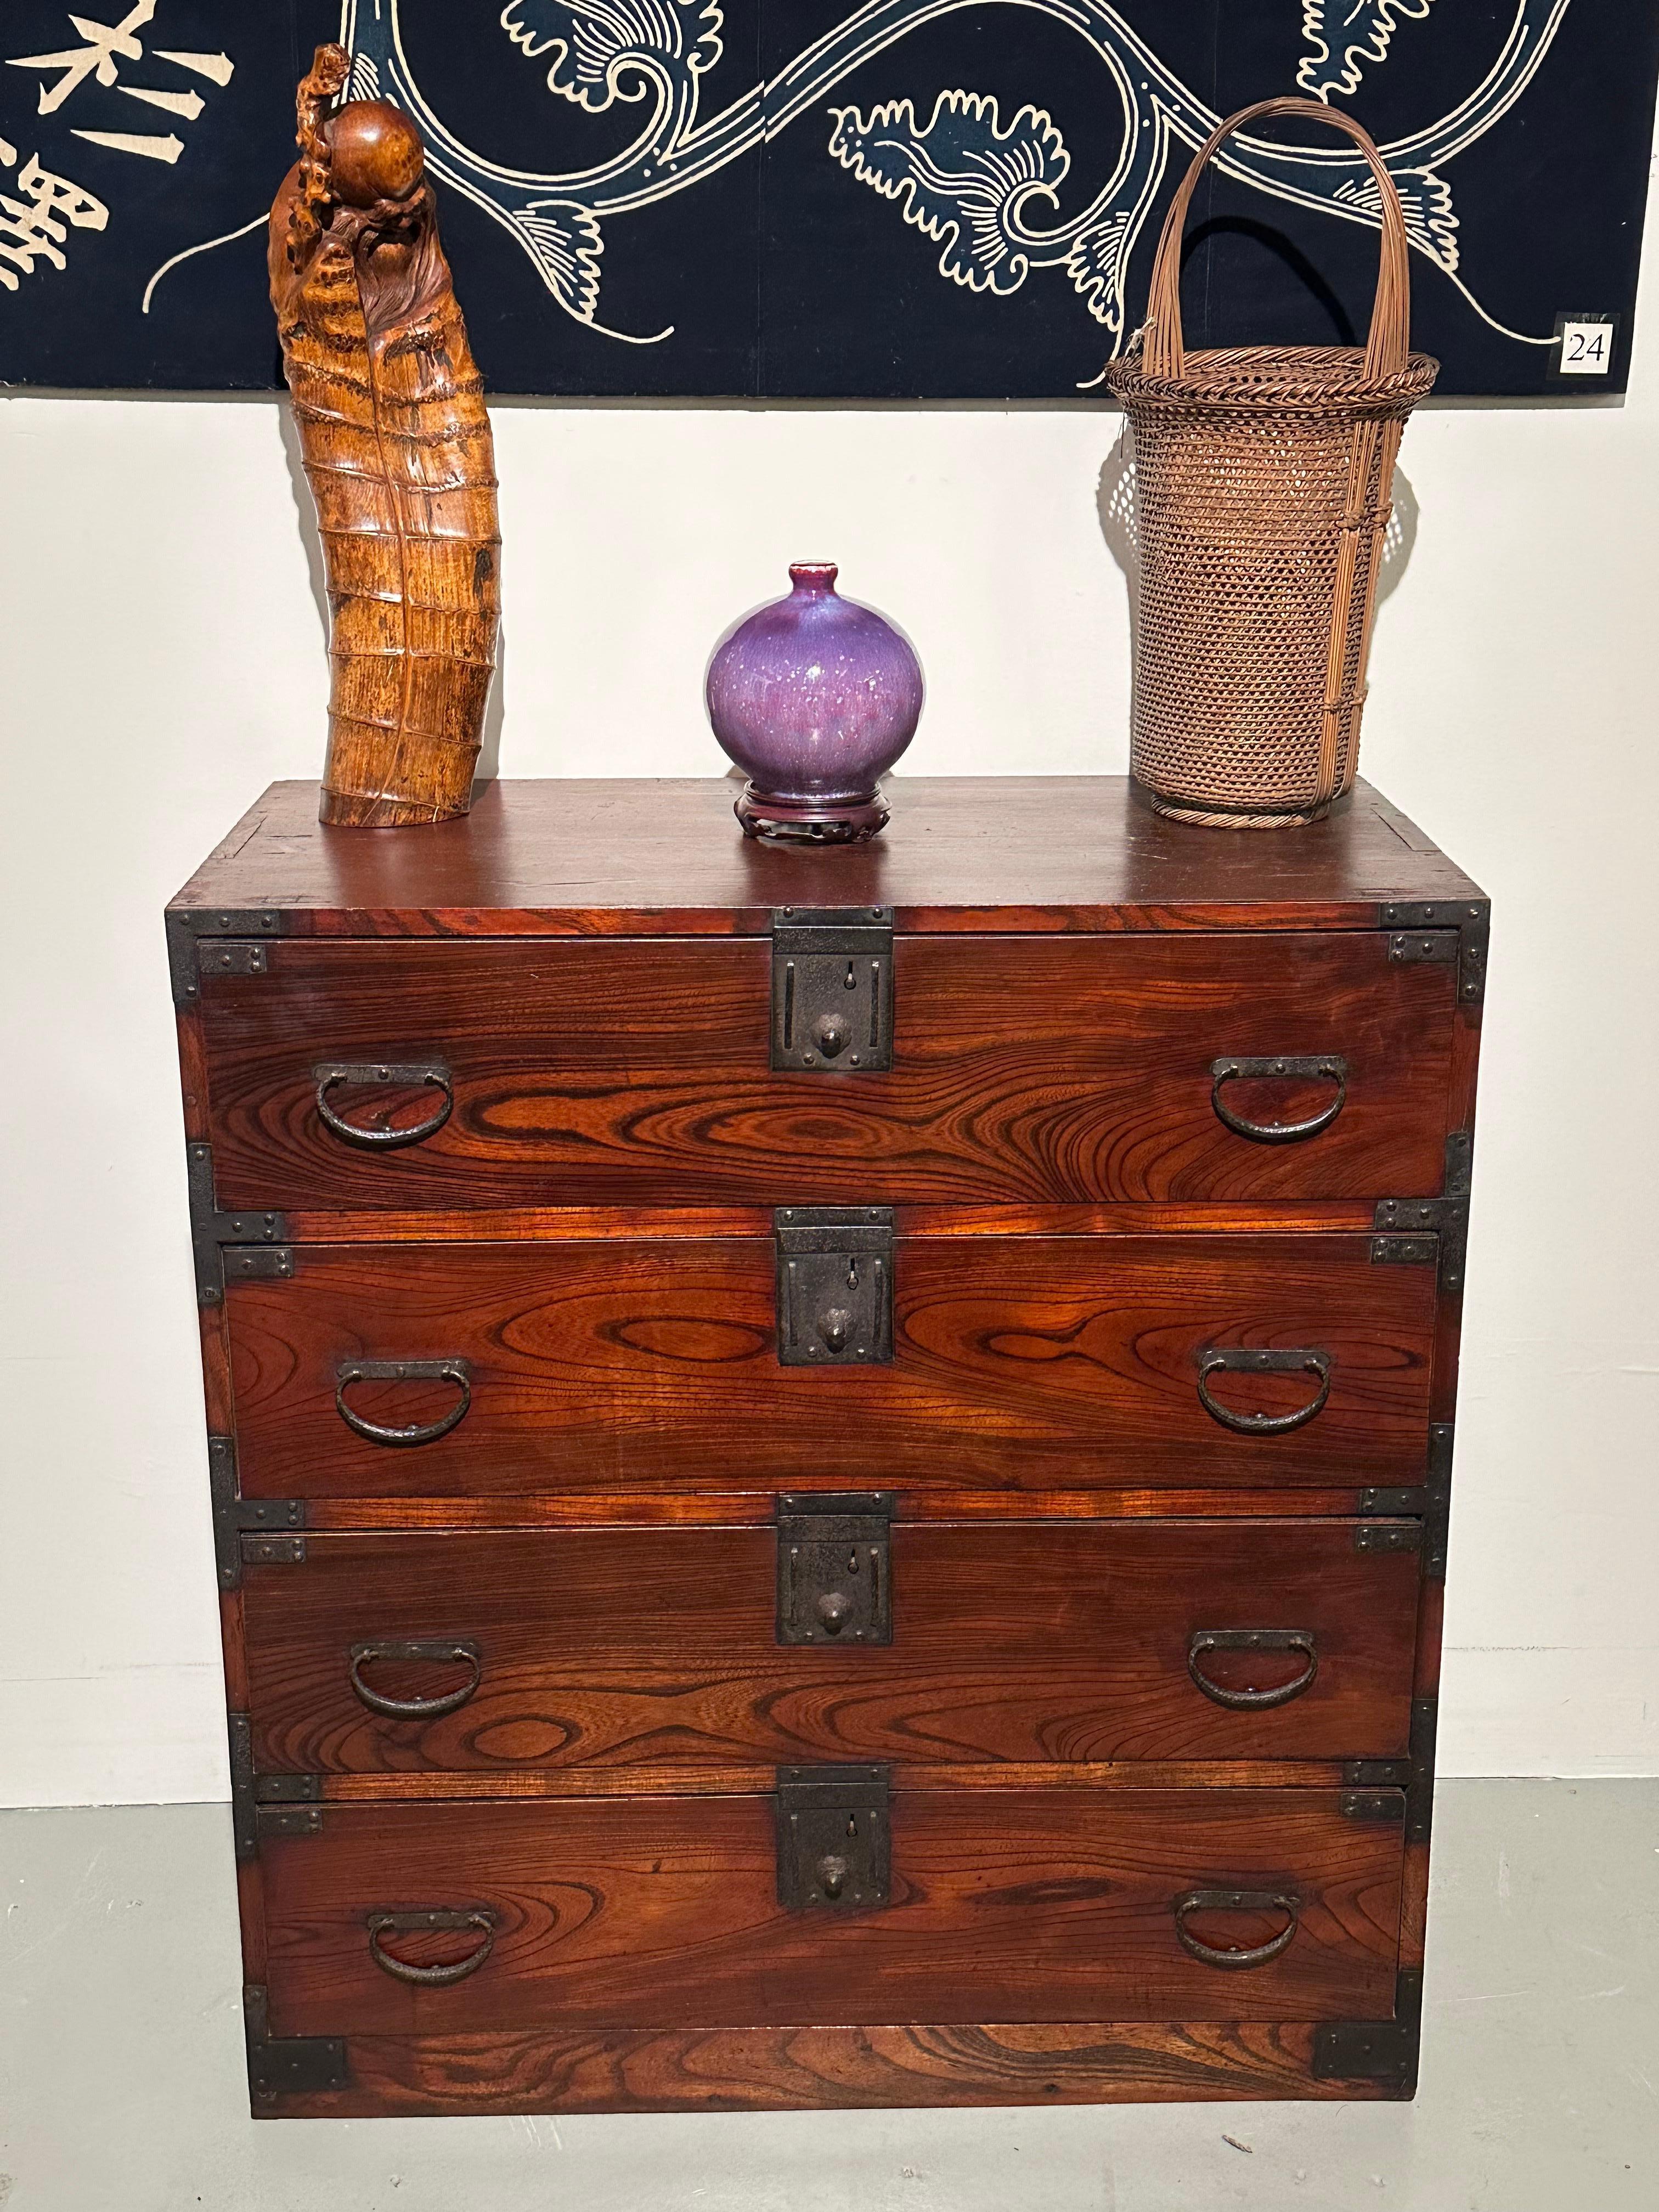 Available from Shogun's Gallery in Portland, Oregon for over 40 years specializing in Asian Arts & Antiques.

This is an Antique Japanese Kimono chest or Ishodansu.  This chest was made in the mid Meiji era (1868-1912) of keyaki (zelkova Japanese